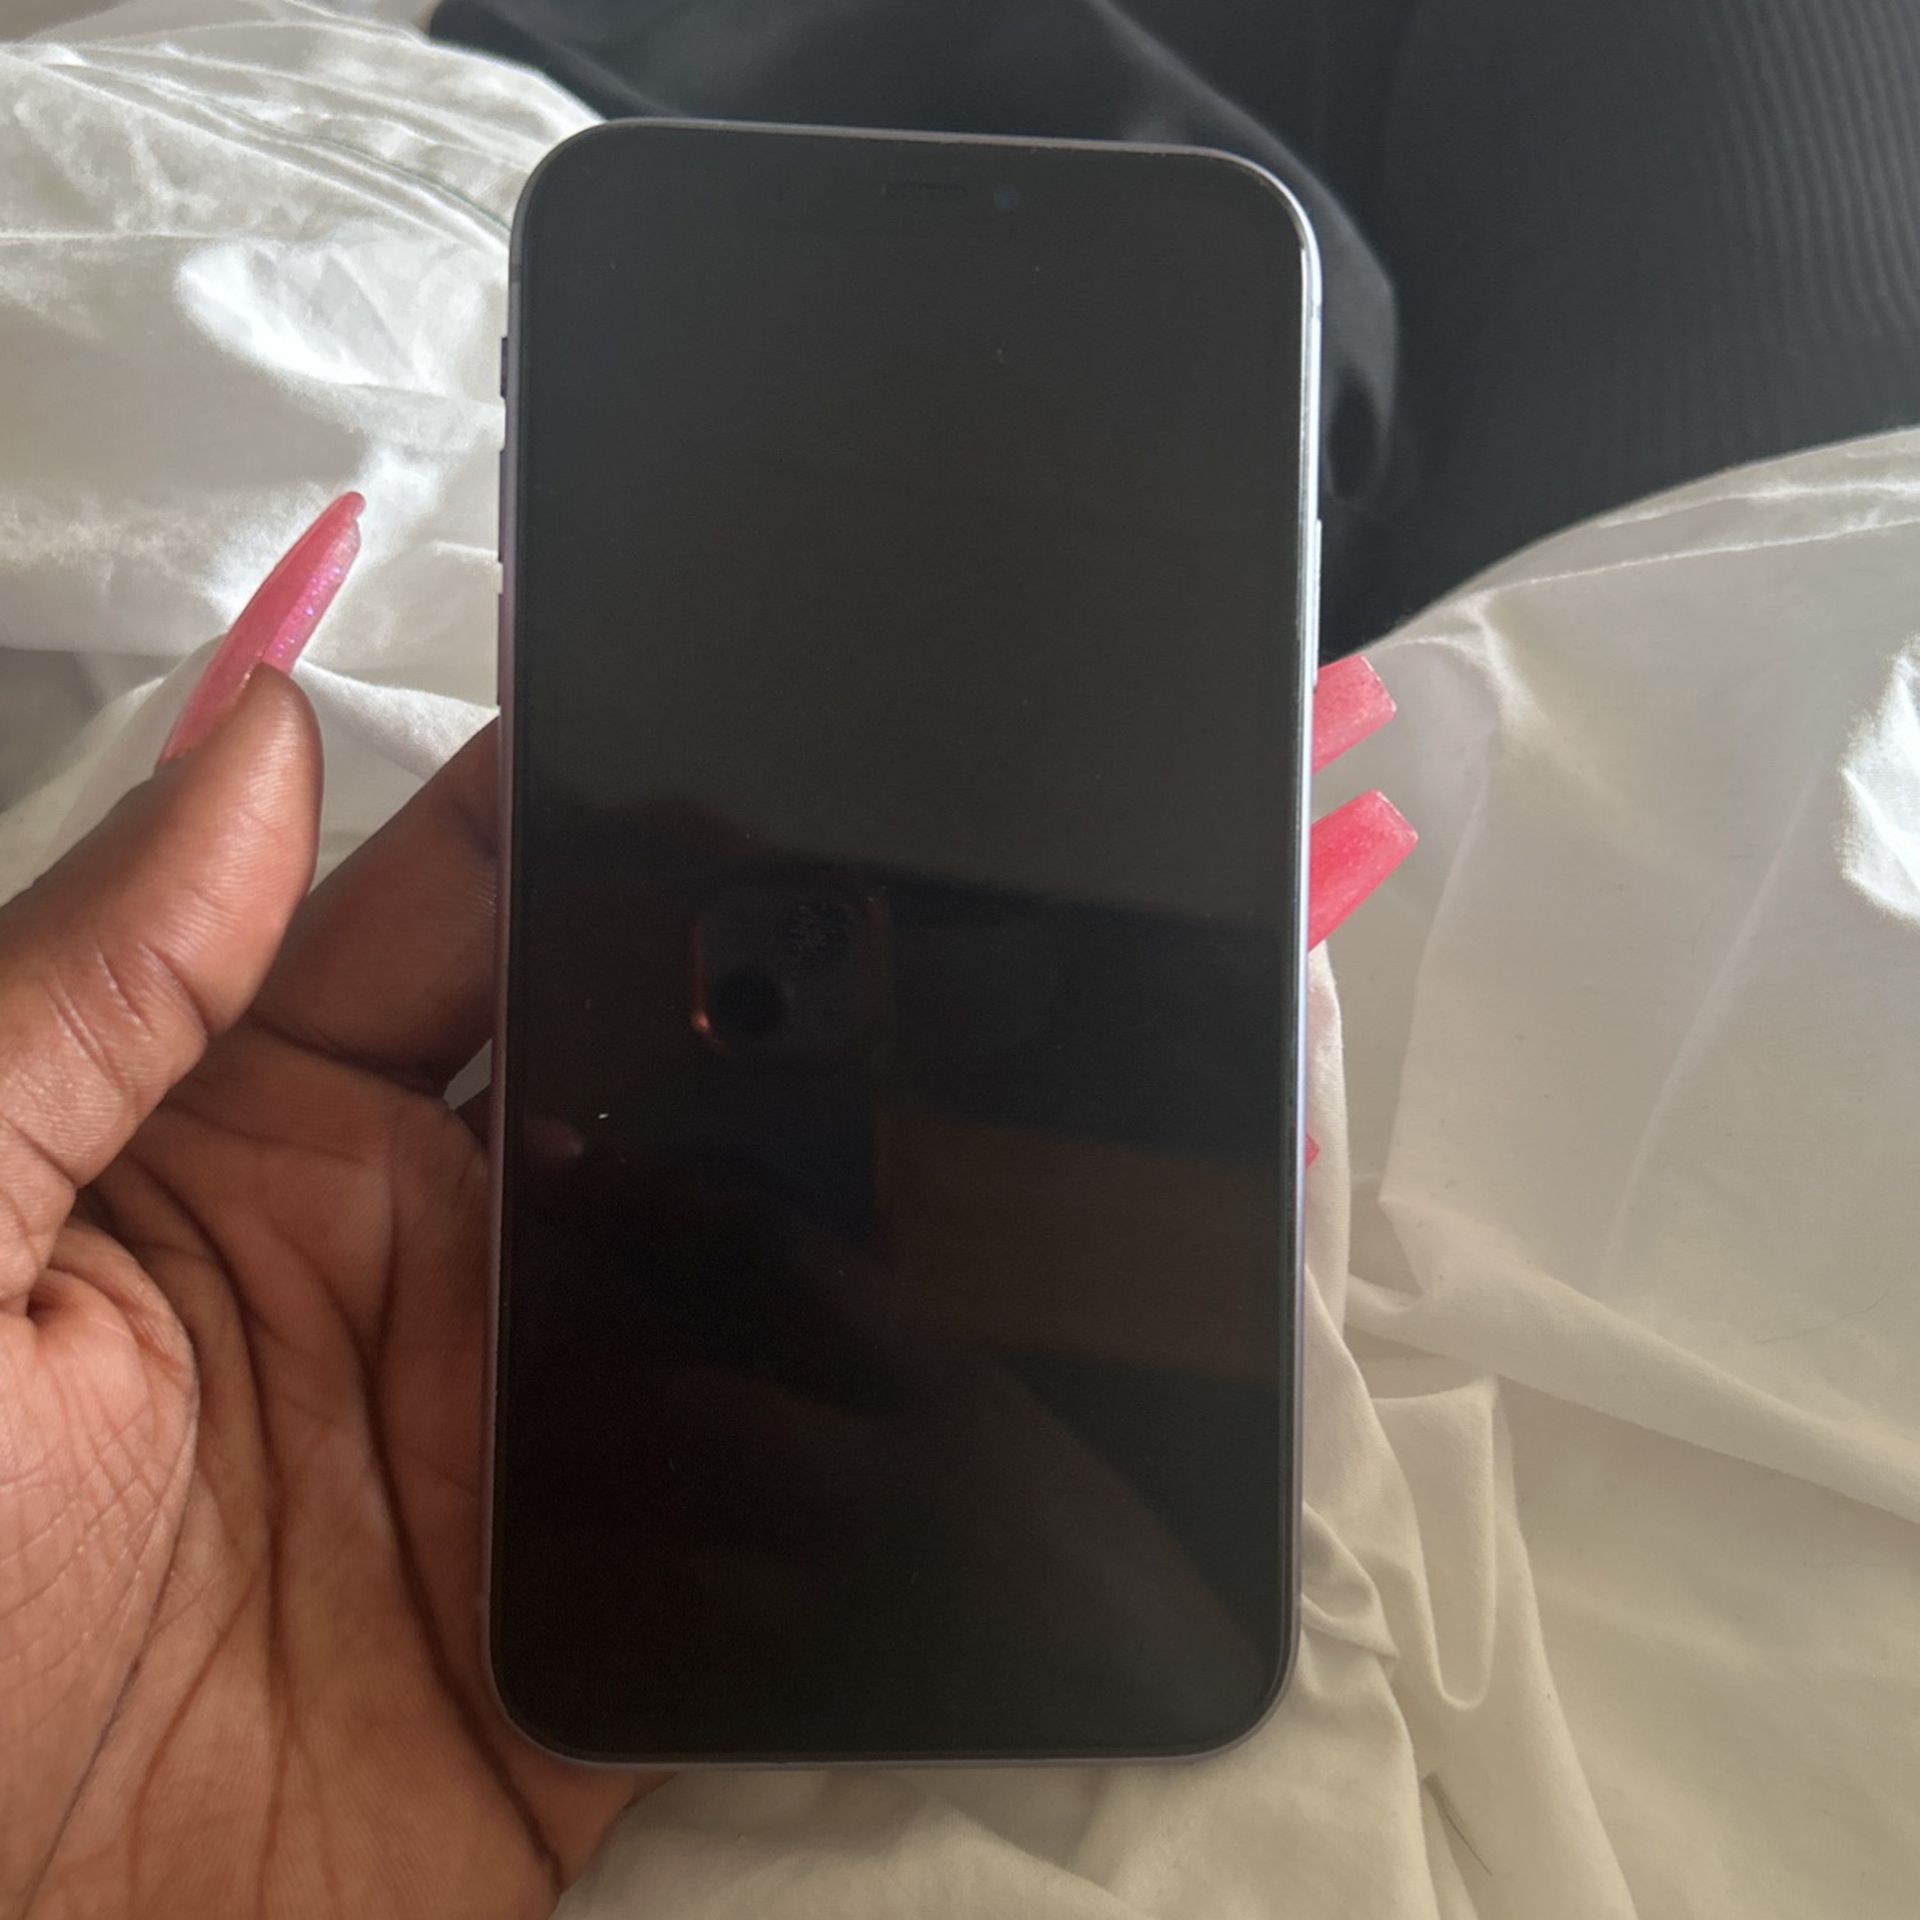 IPHONE 11 FOR SALE 